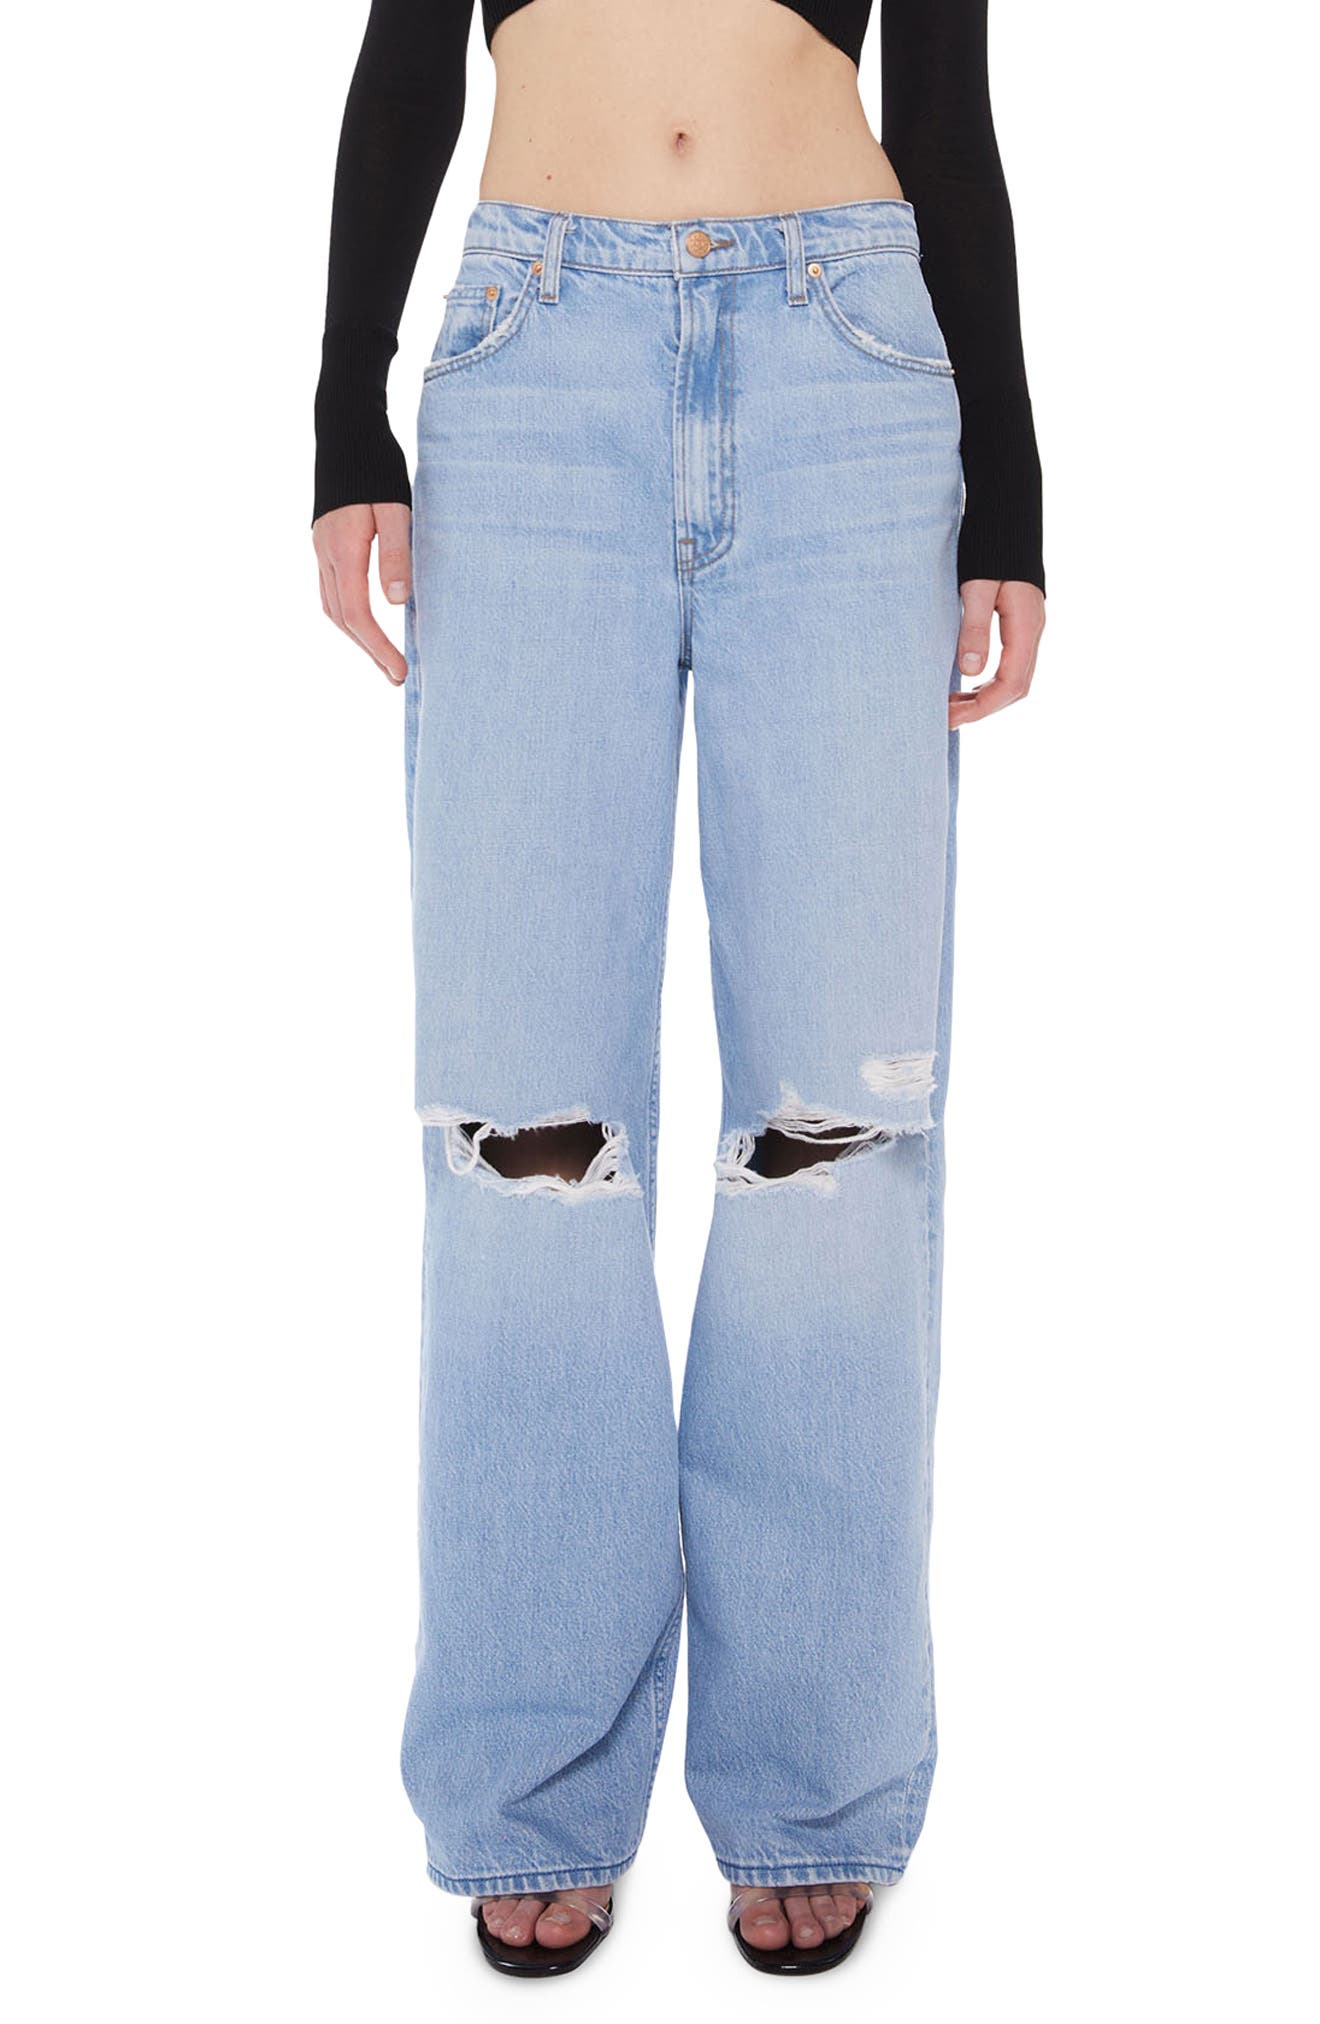 MOTHER SNACKS! The Fun Dip Distressed High Waist Puddle Wide Leg Jeans in Lots Of Nibbles